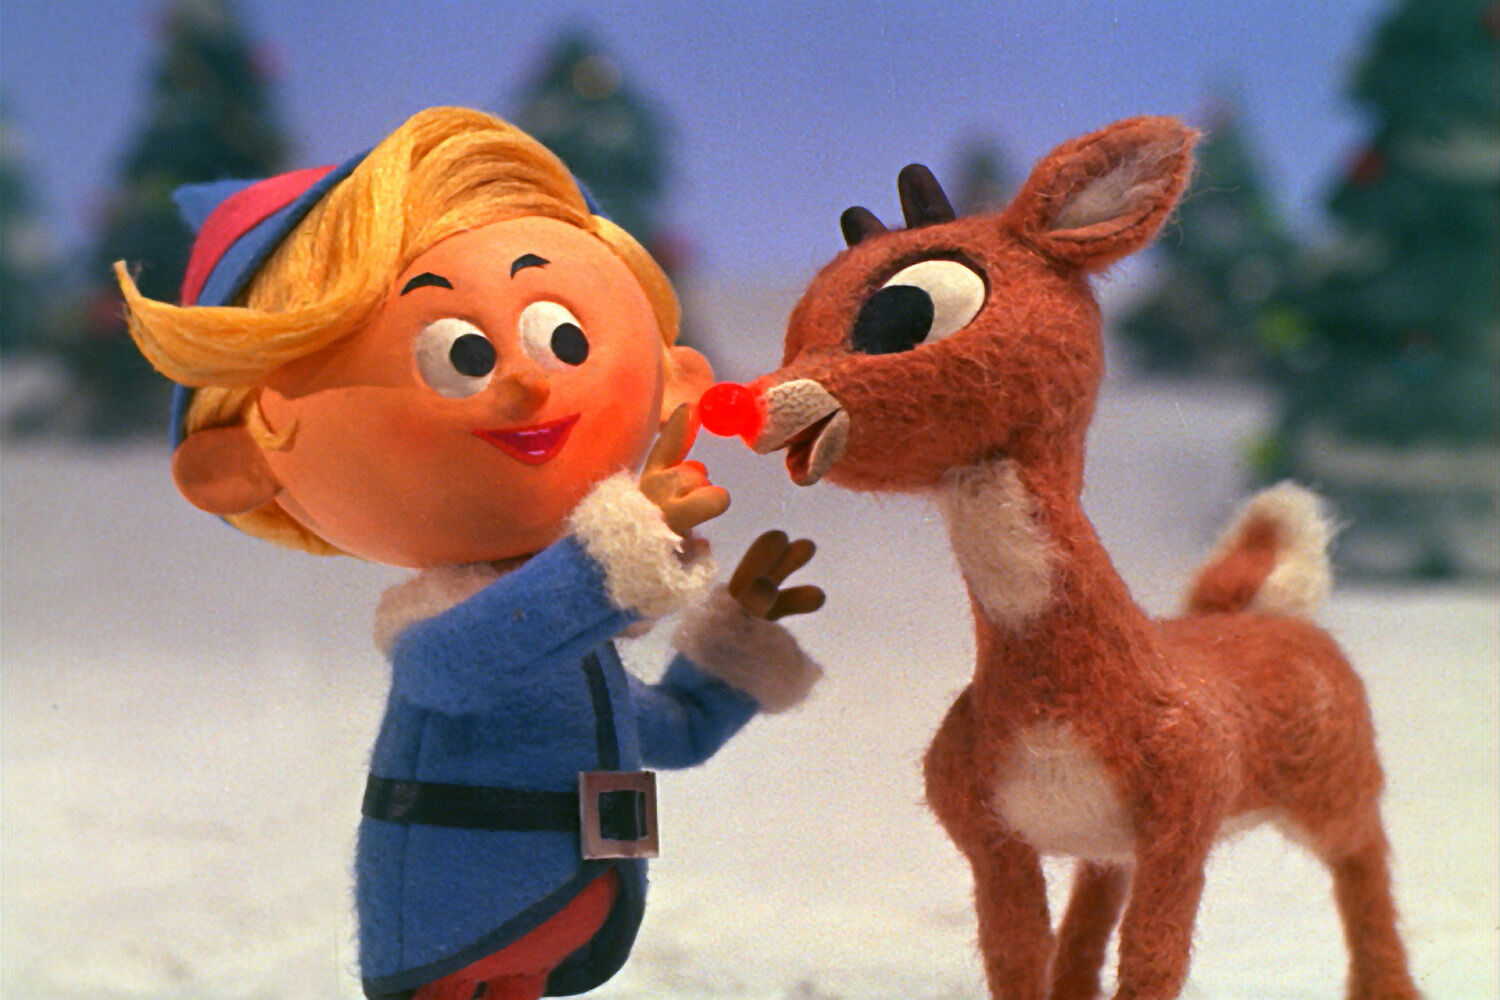 Revealed: The obvious gay subtext of &#8216;Rudolph the Red-Nosed Reindeer&#8217;